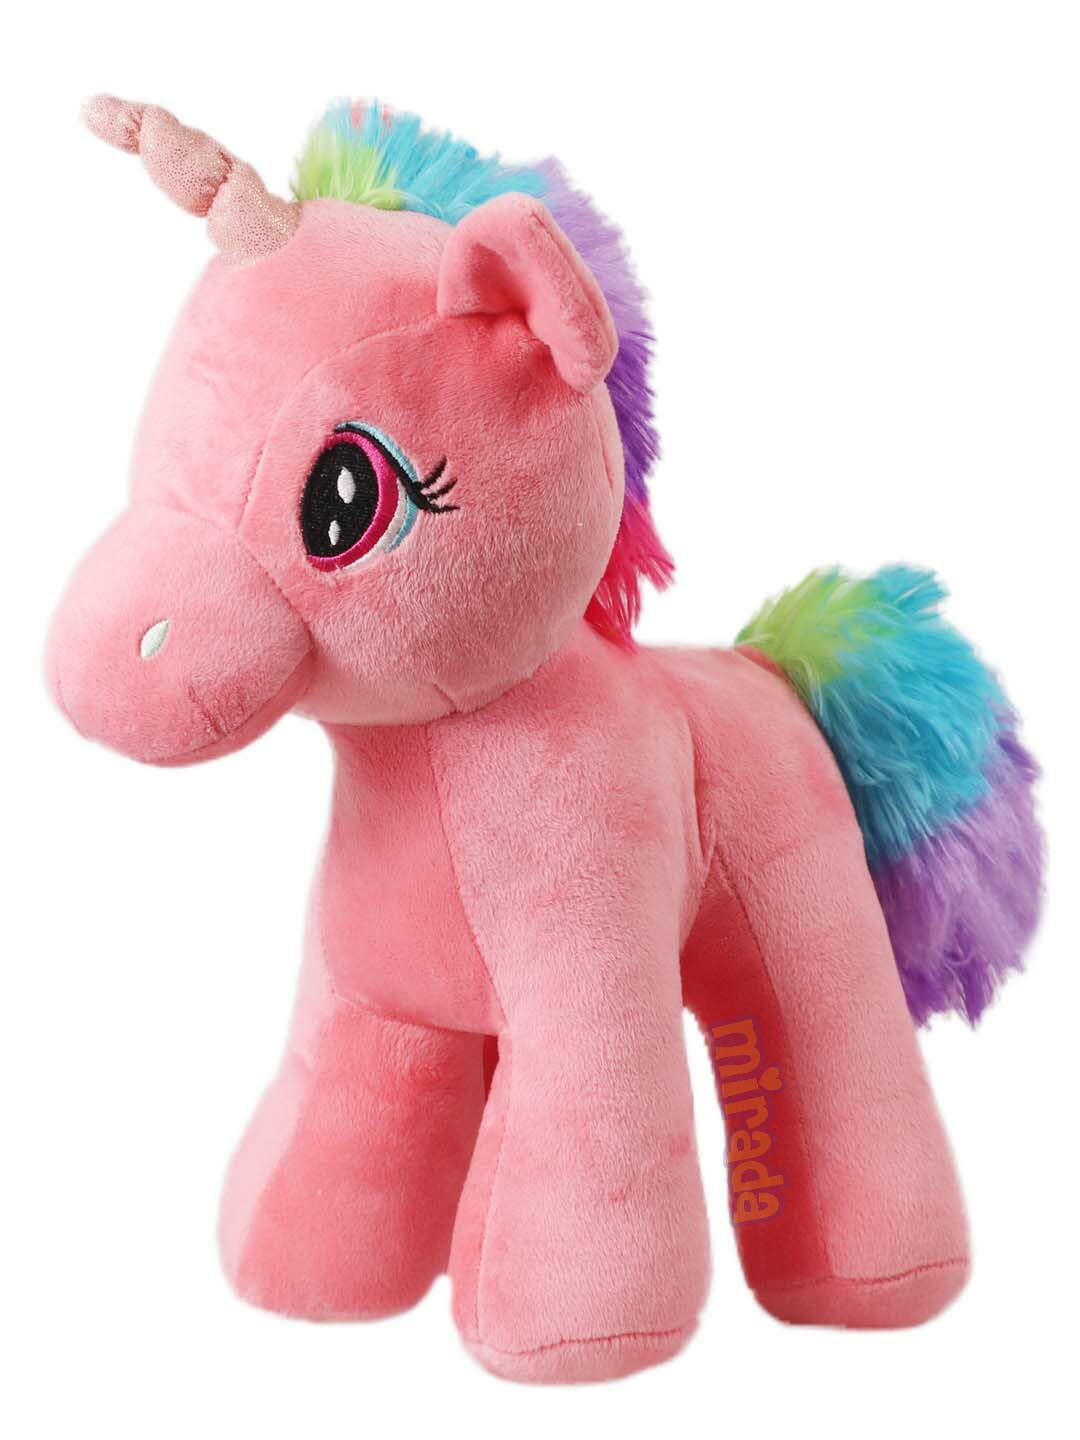 Mirada 29cm Standing Unicorn with Glitter Horn - Coral